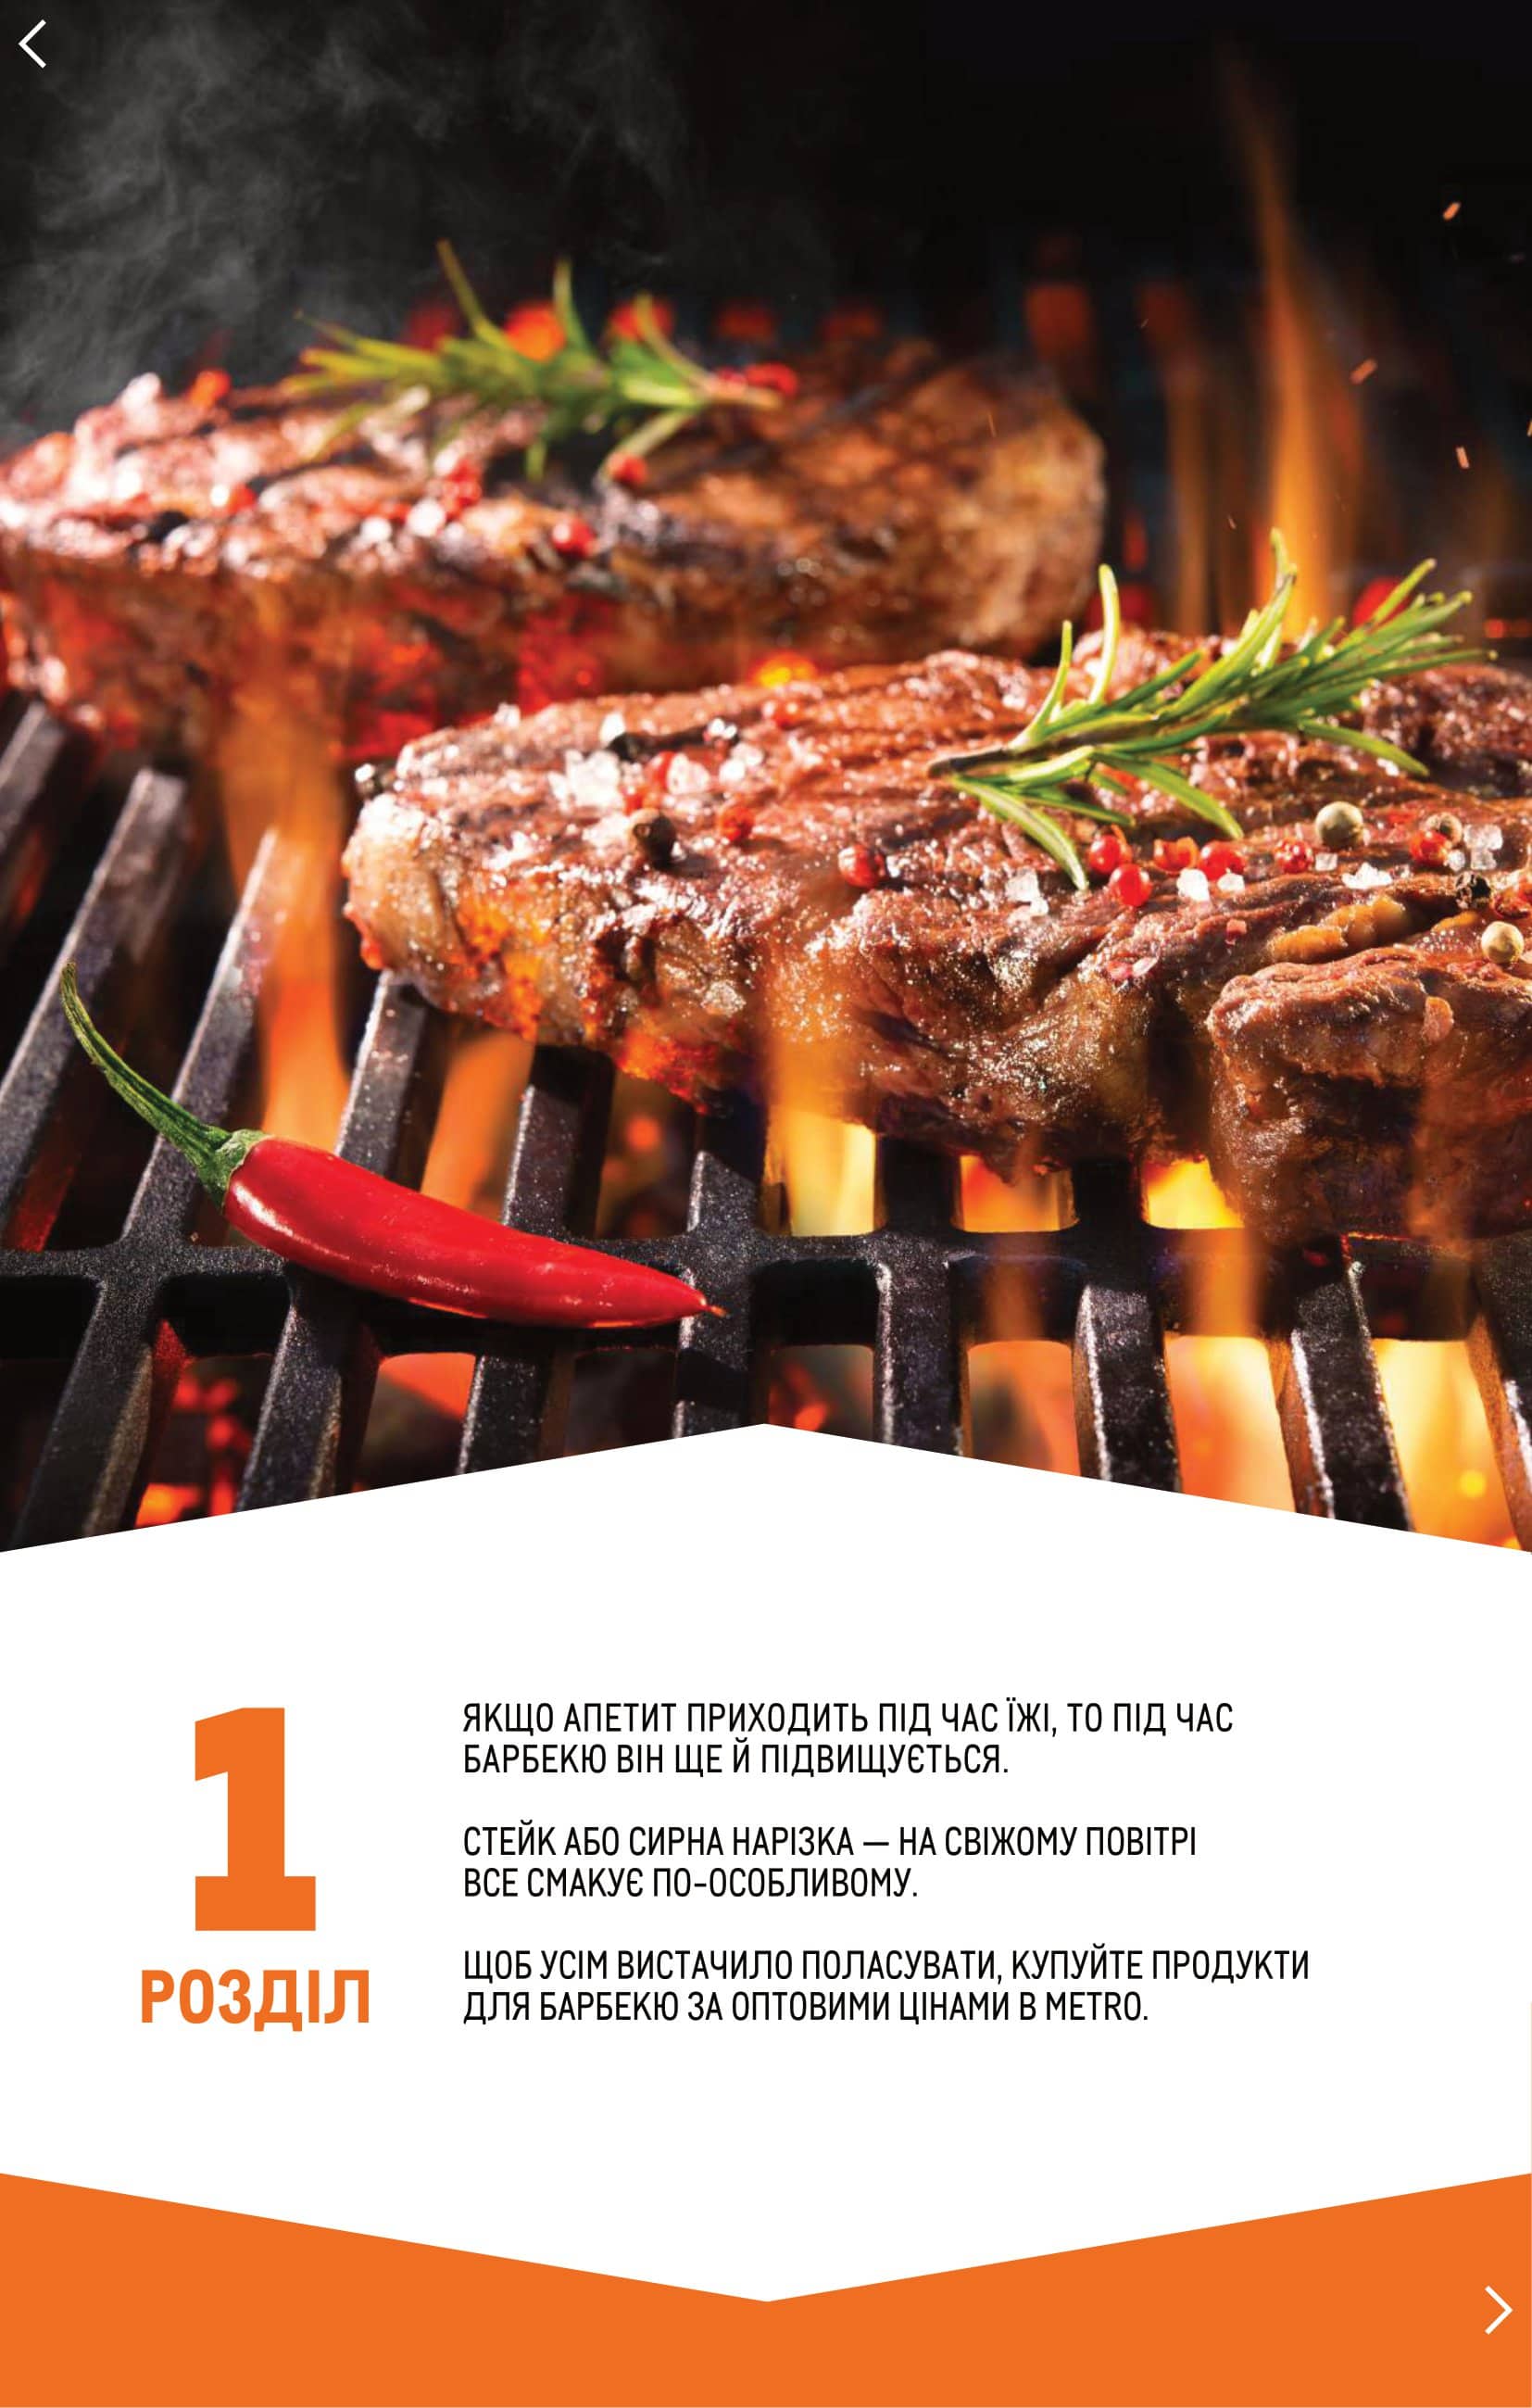 Metro - Catalog of optocultural barbecue - 3